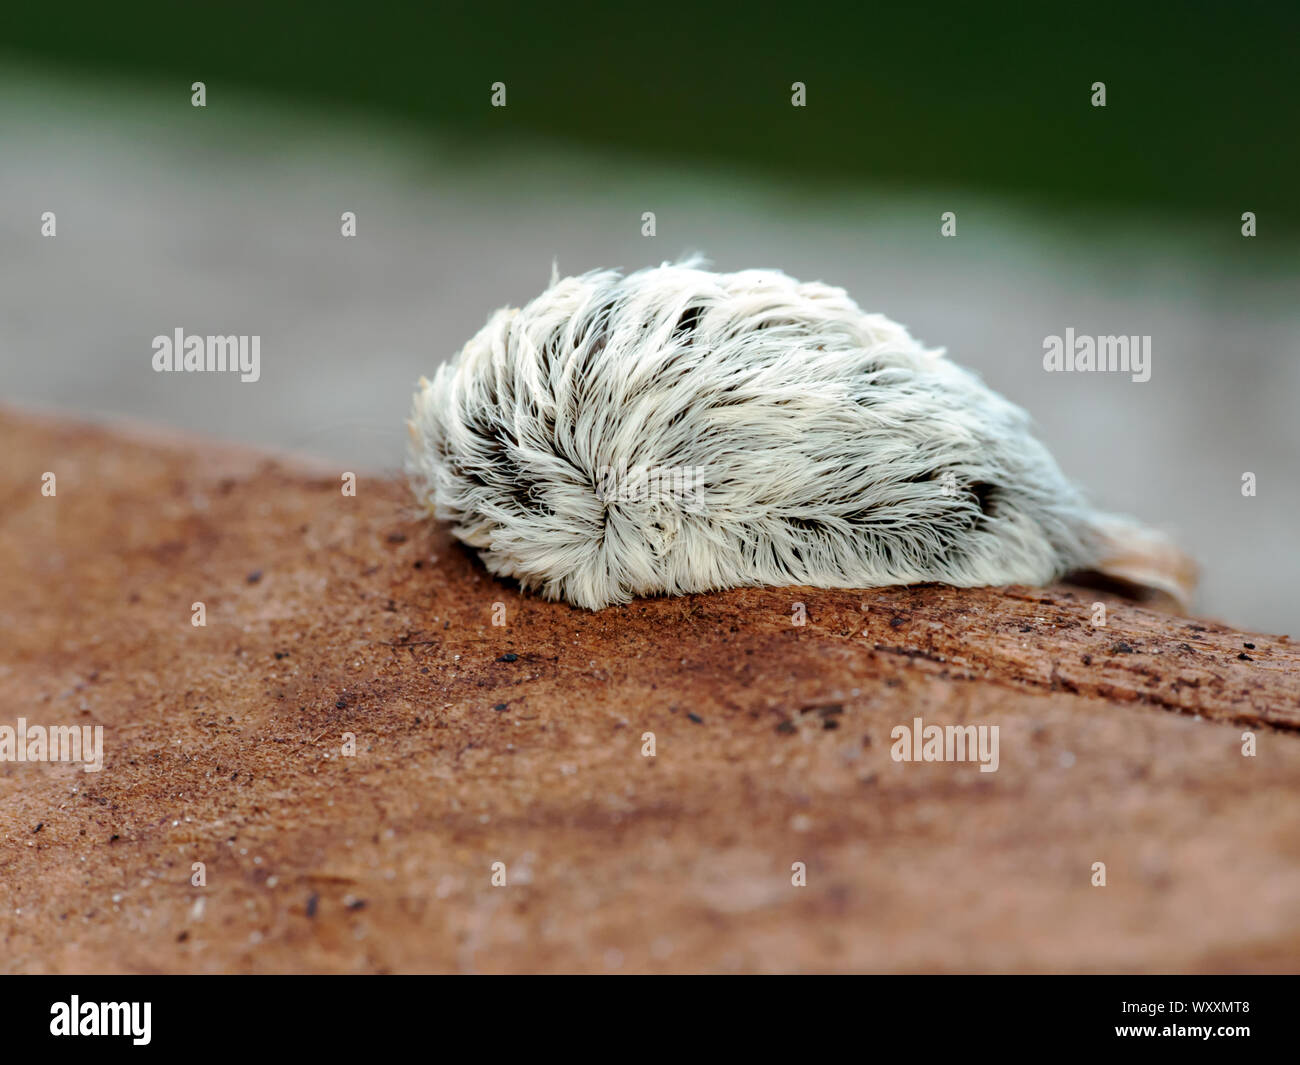 Macro shot of a Megalopyge opercularis caterpillar, the venomous larval form of the Southern Flannel Moth. Stock Photo